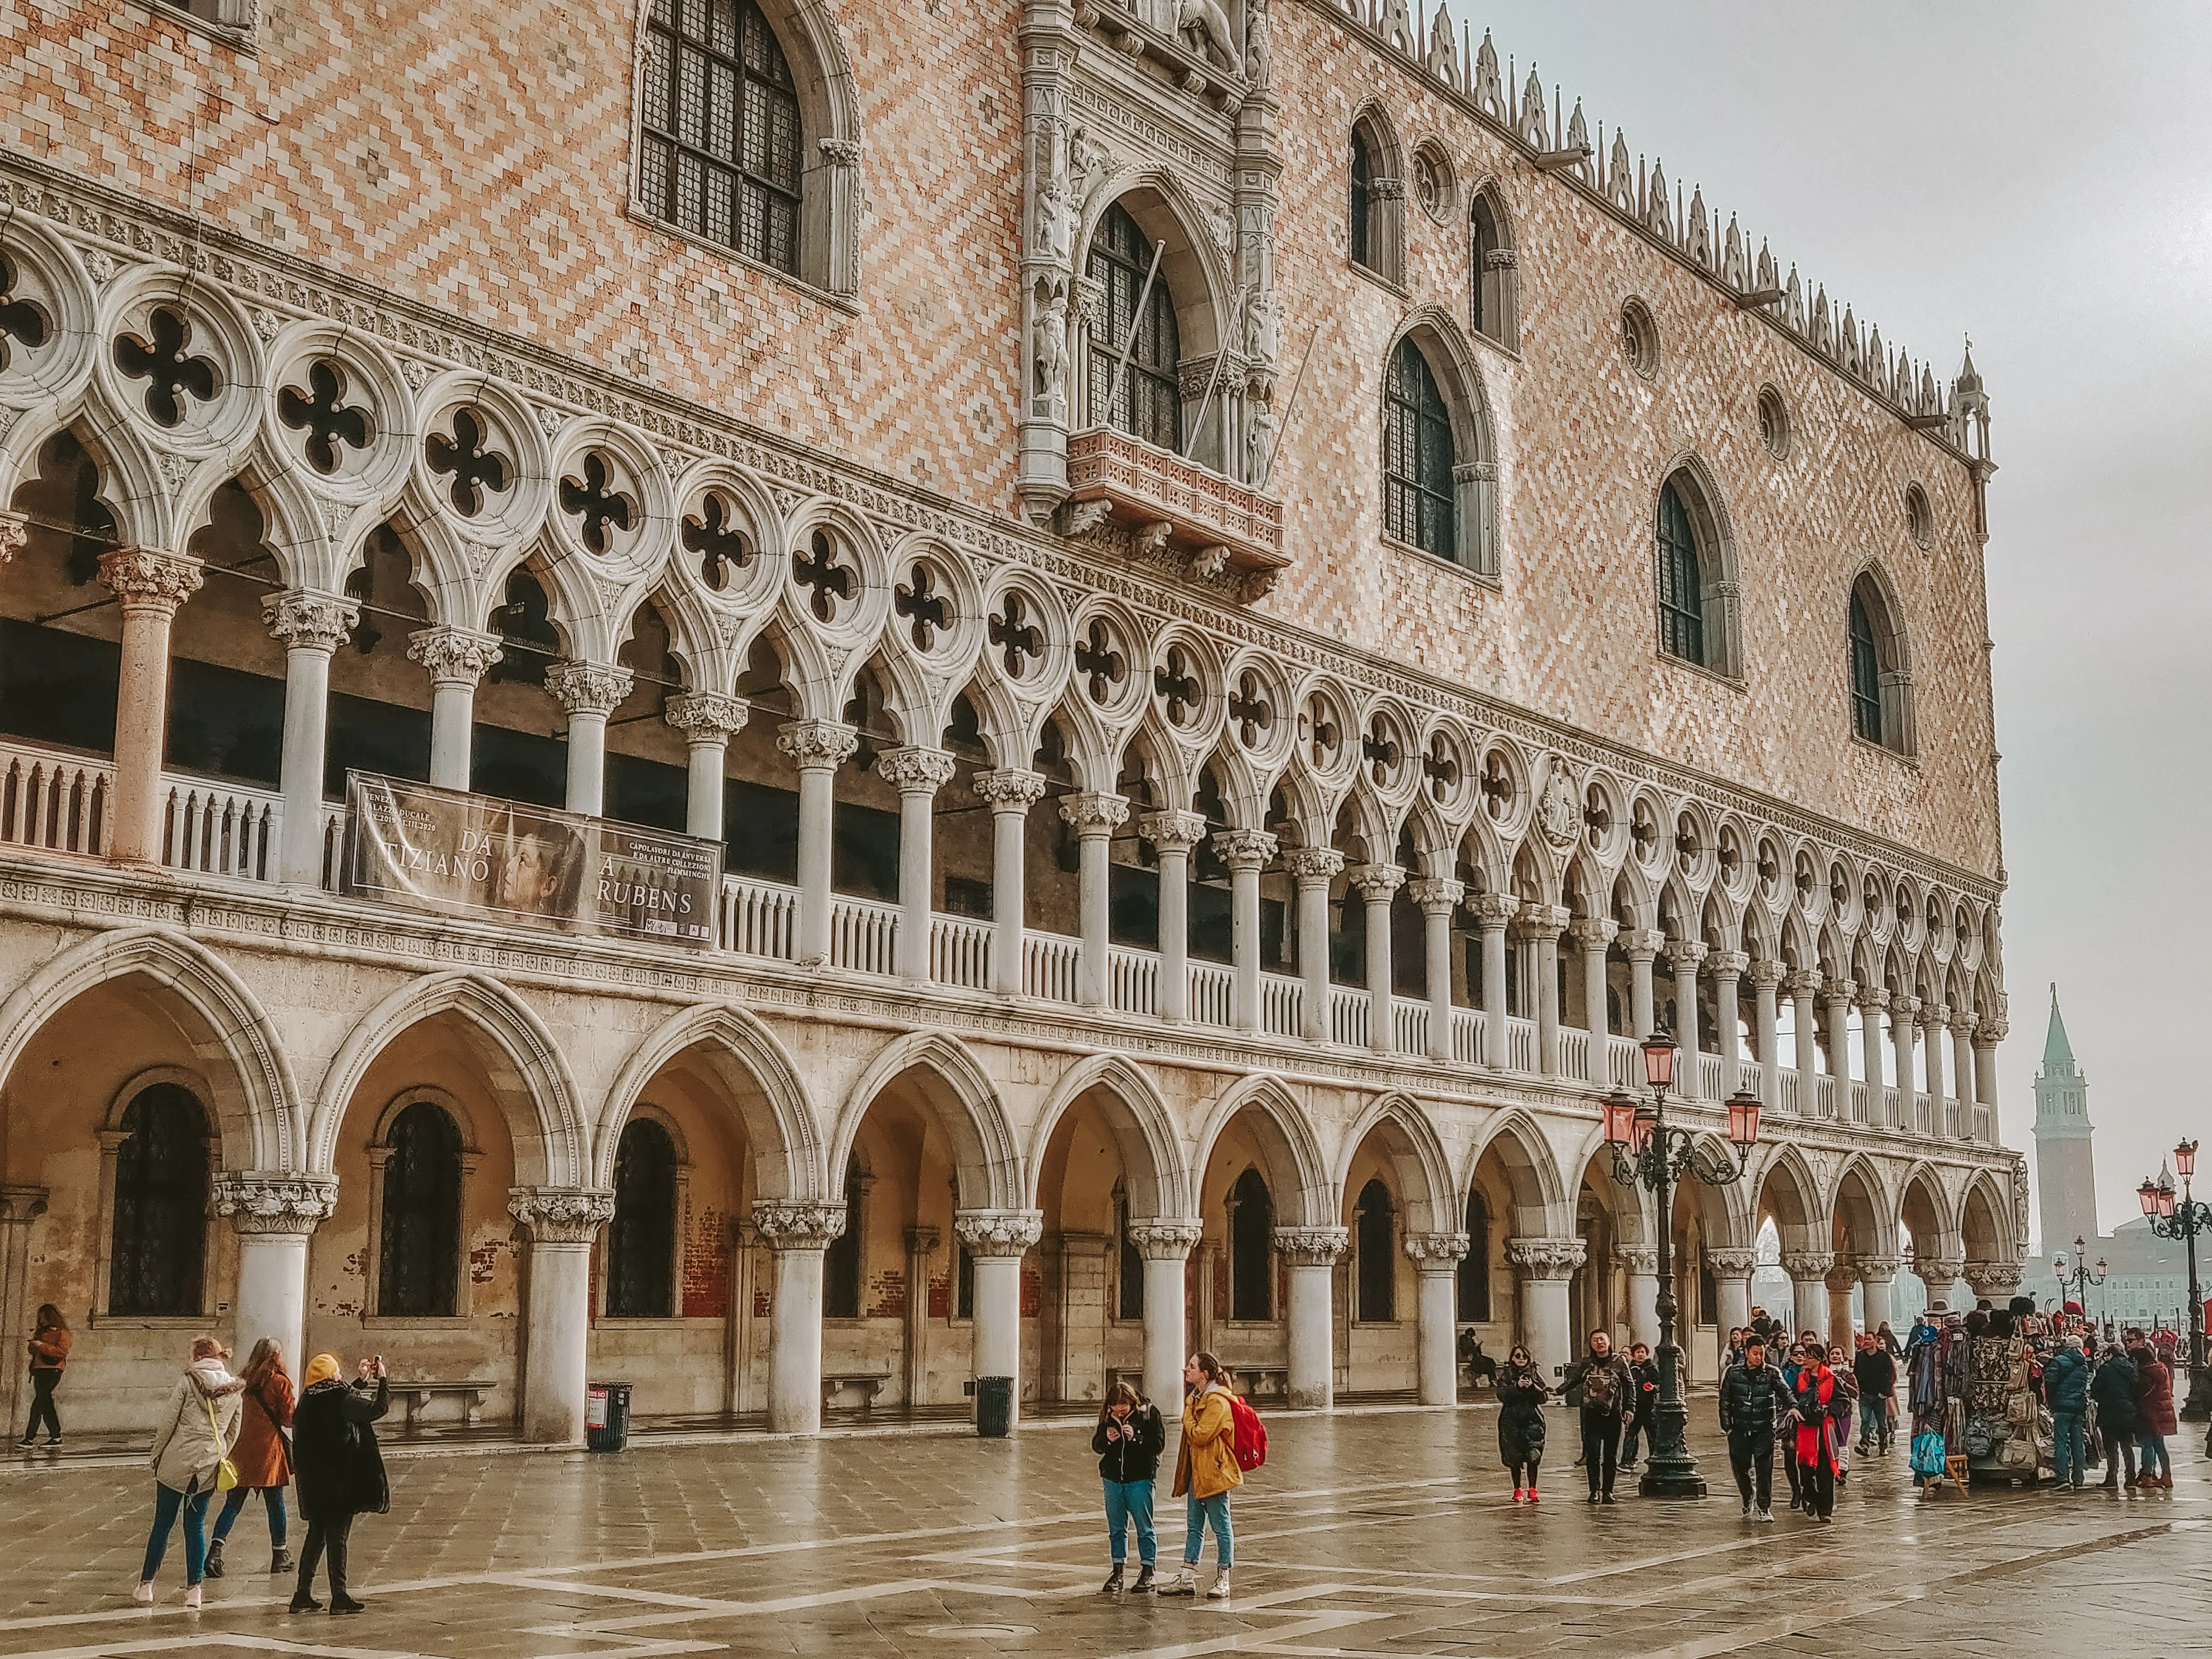 San Marco Square in Venice, Italy, during a 10 day itinerary